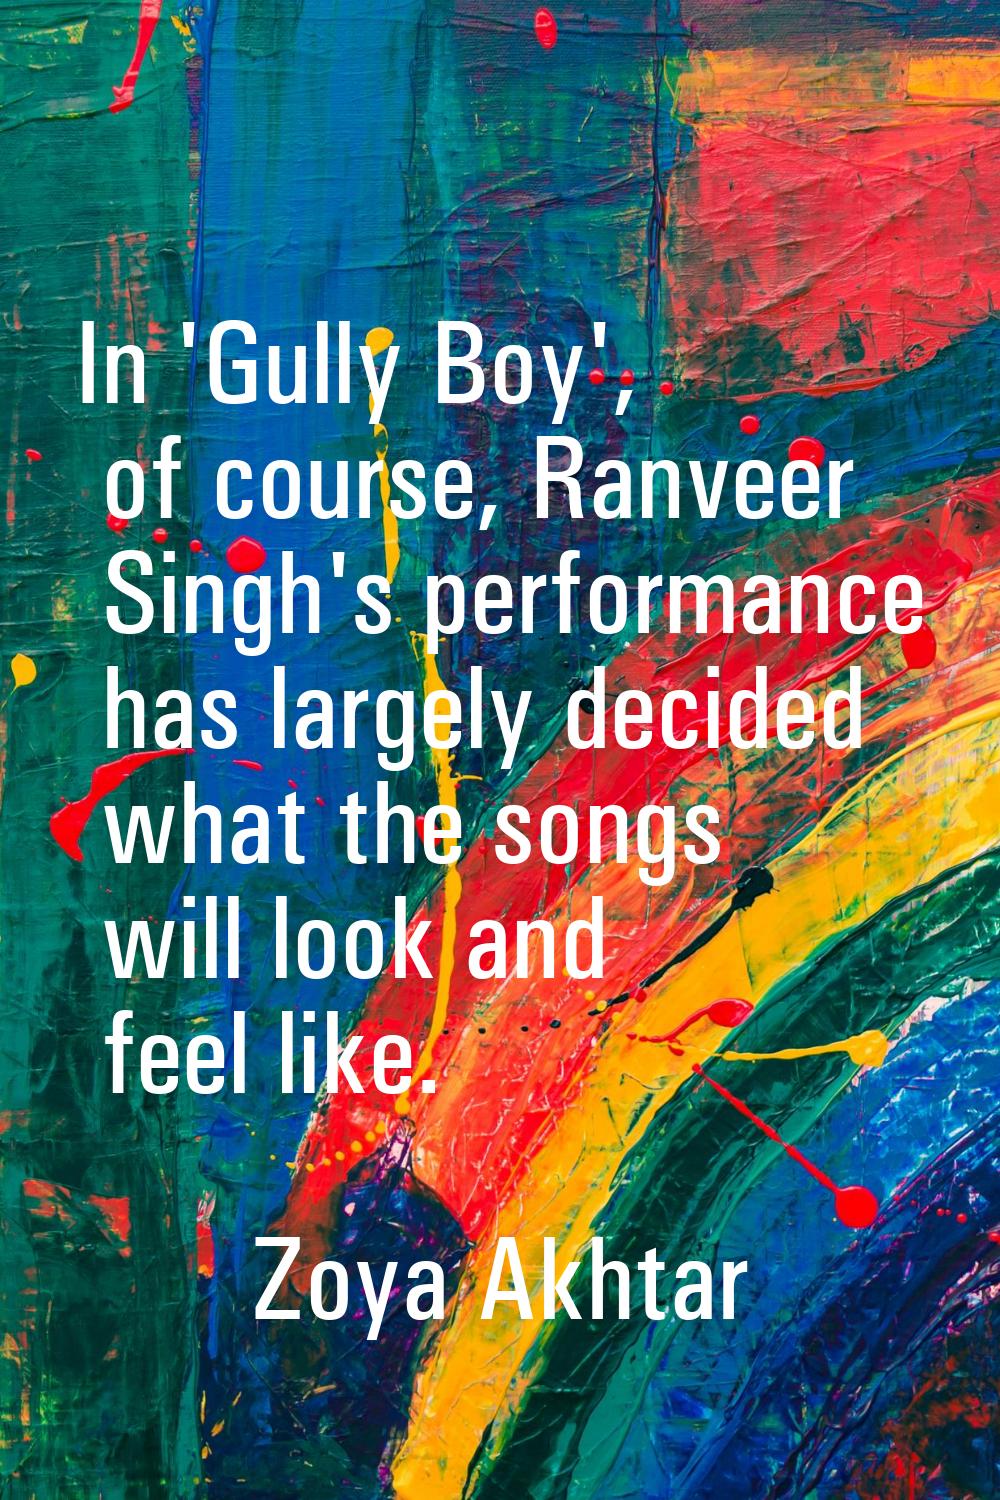 In 'Gully Boy', of course, Ranveer Singh's performance has largely decided what the songs will look